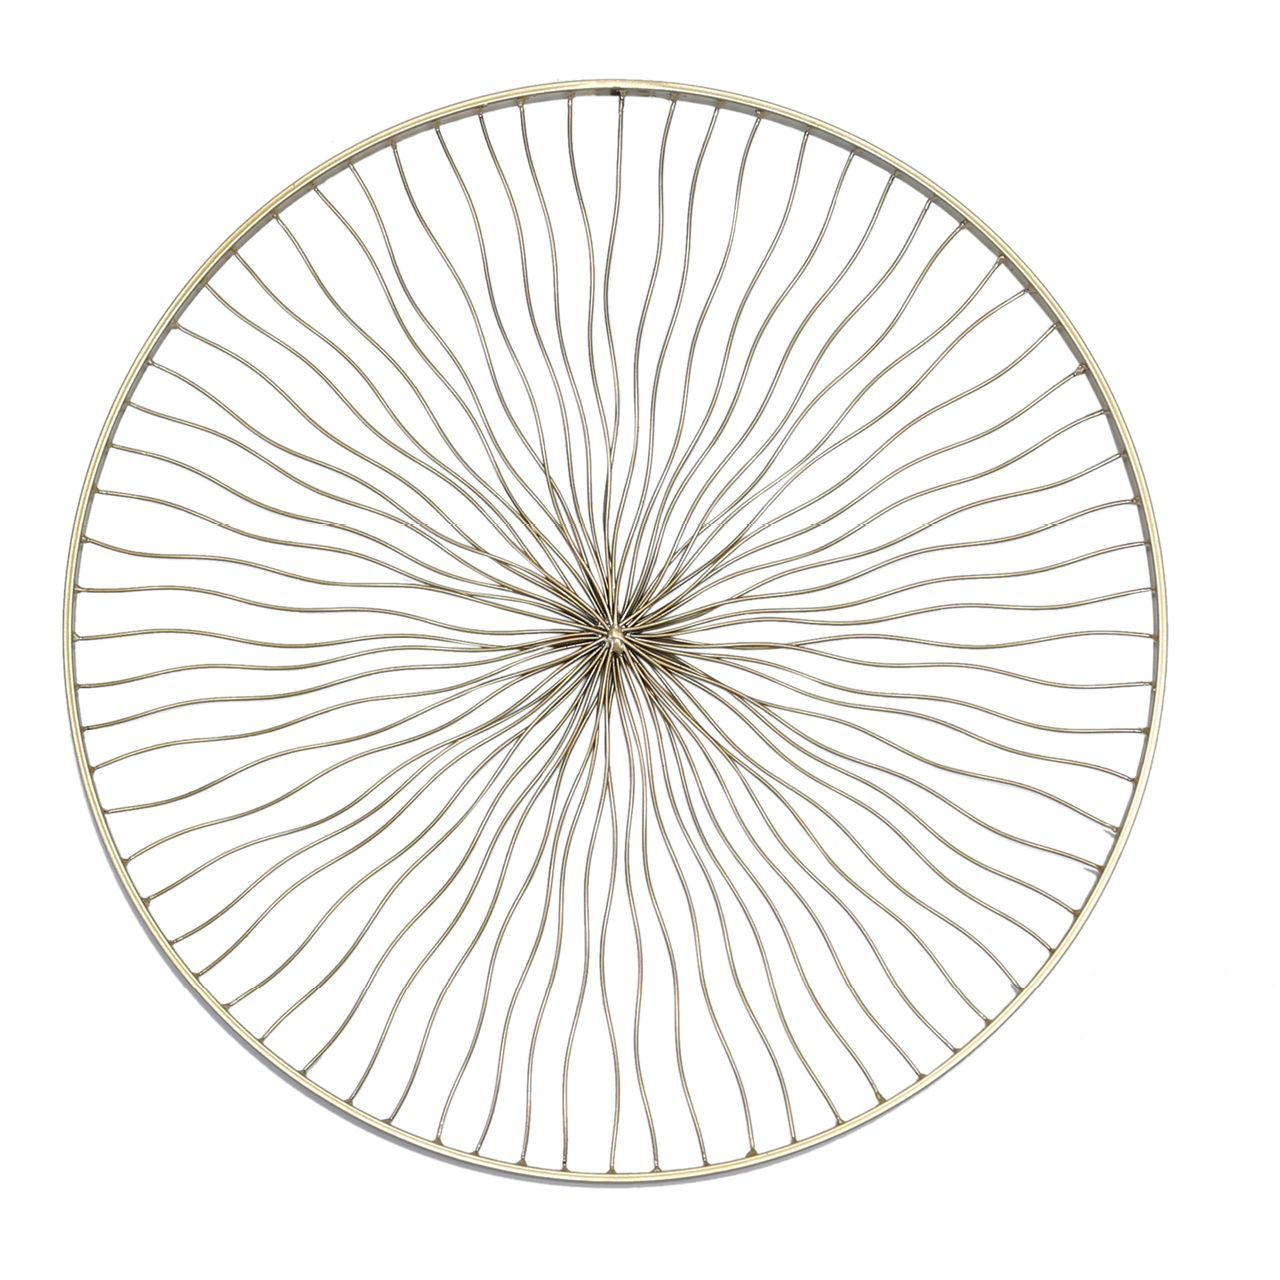 66cm Round Metal Wall Art With Mirror Gold Throughout Latest Glossy Circle Metal Wall Art (View 15 of 20)